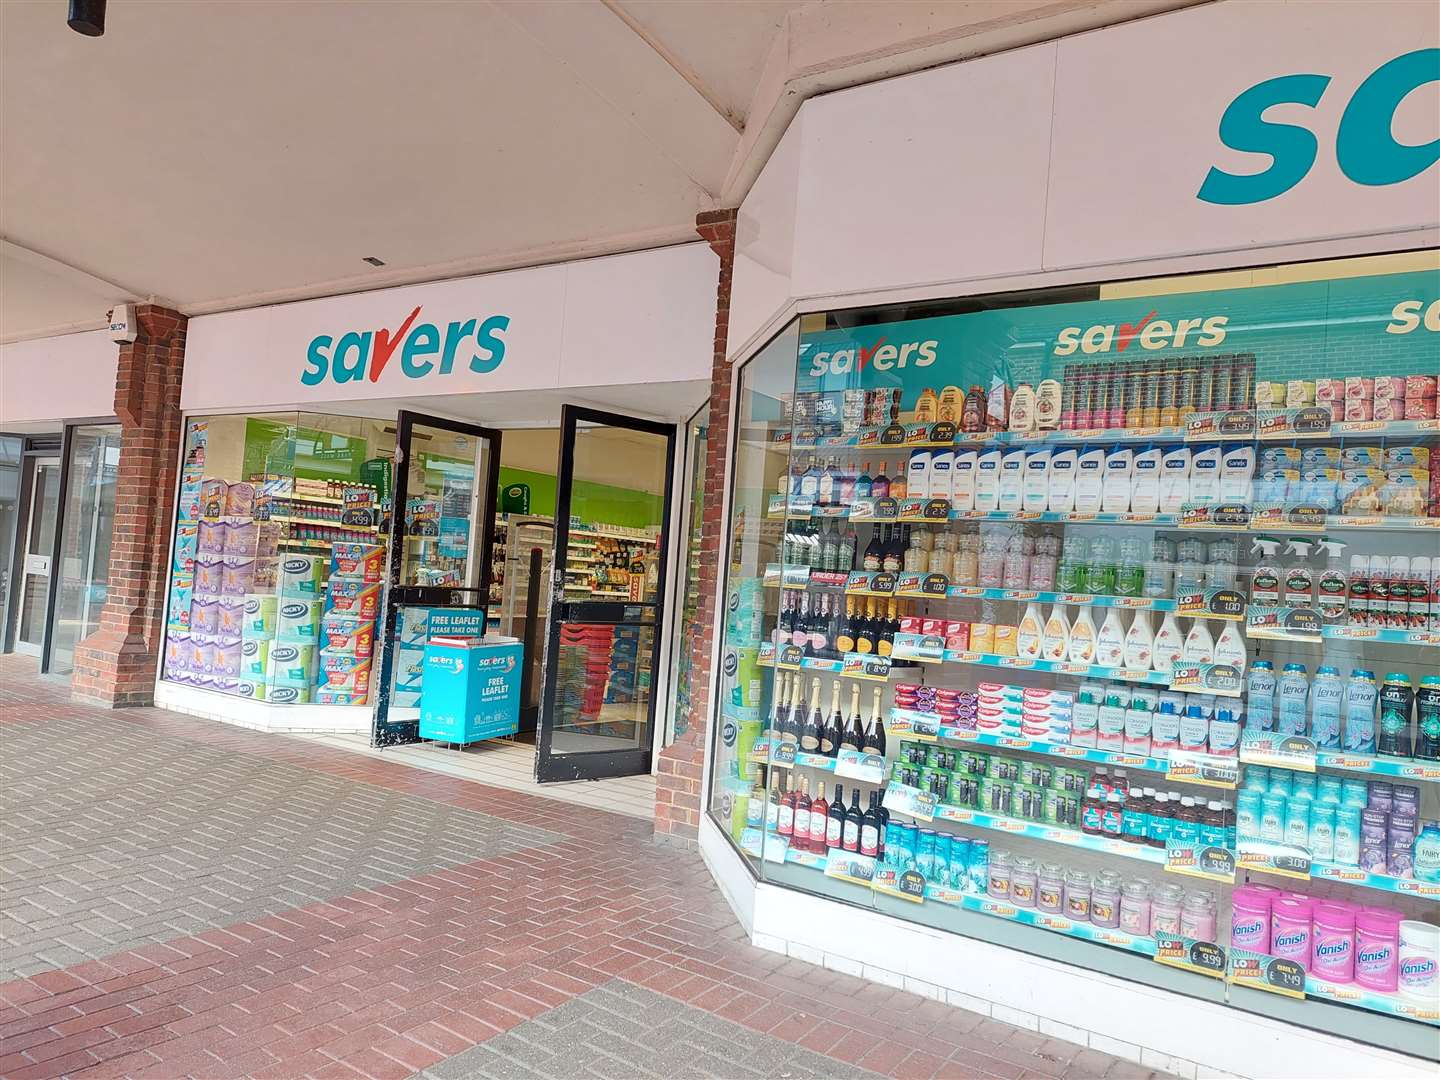 James Perowne stole a £7.99 bottle of rum from the Savers store in Park Mall, Ashford